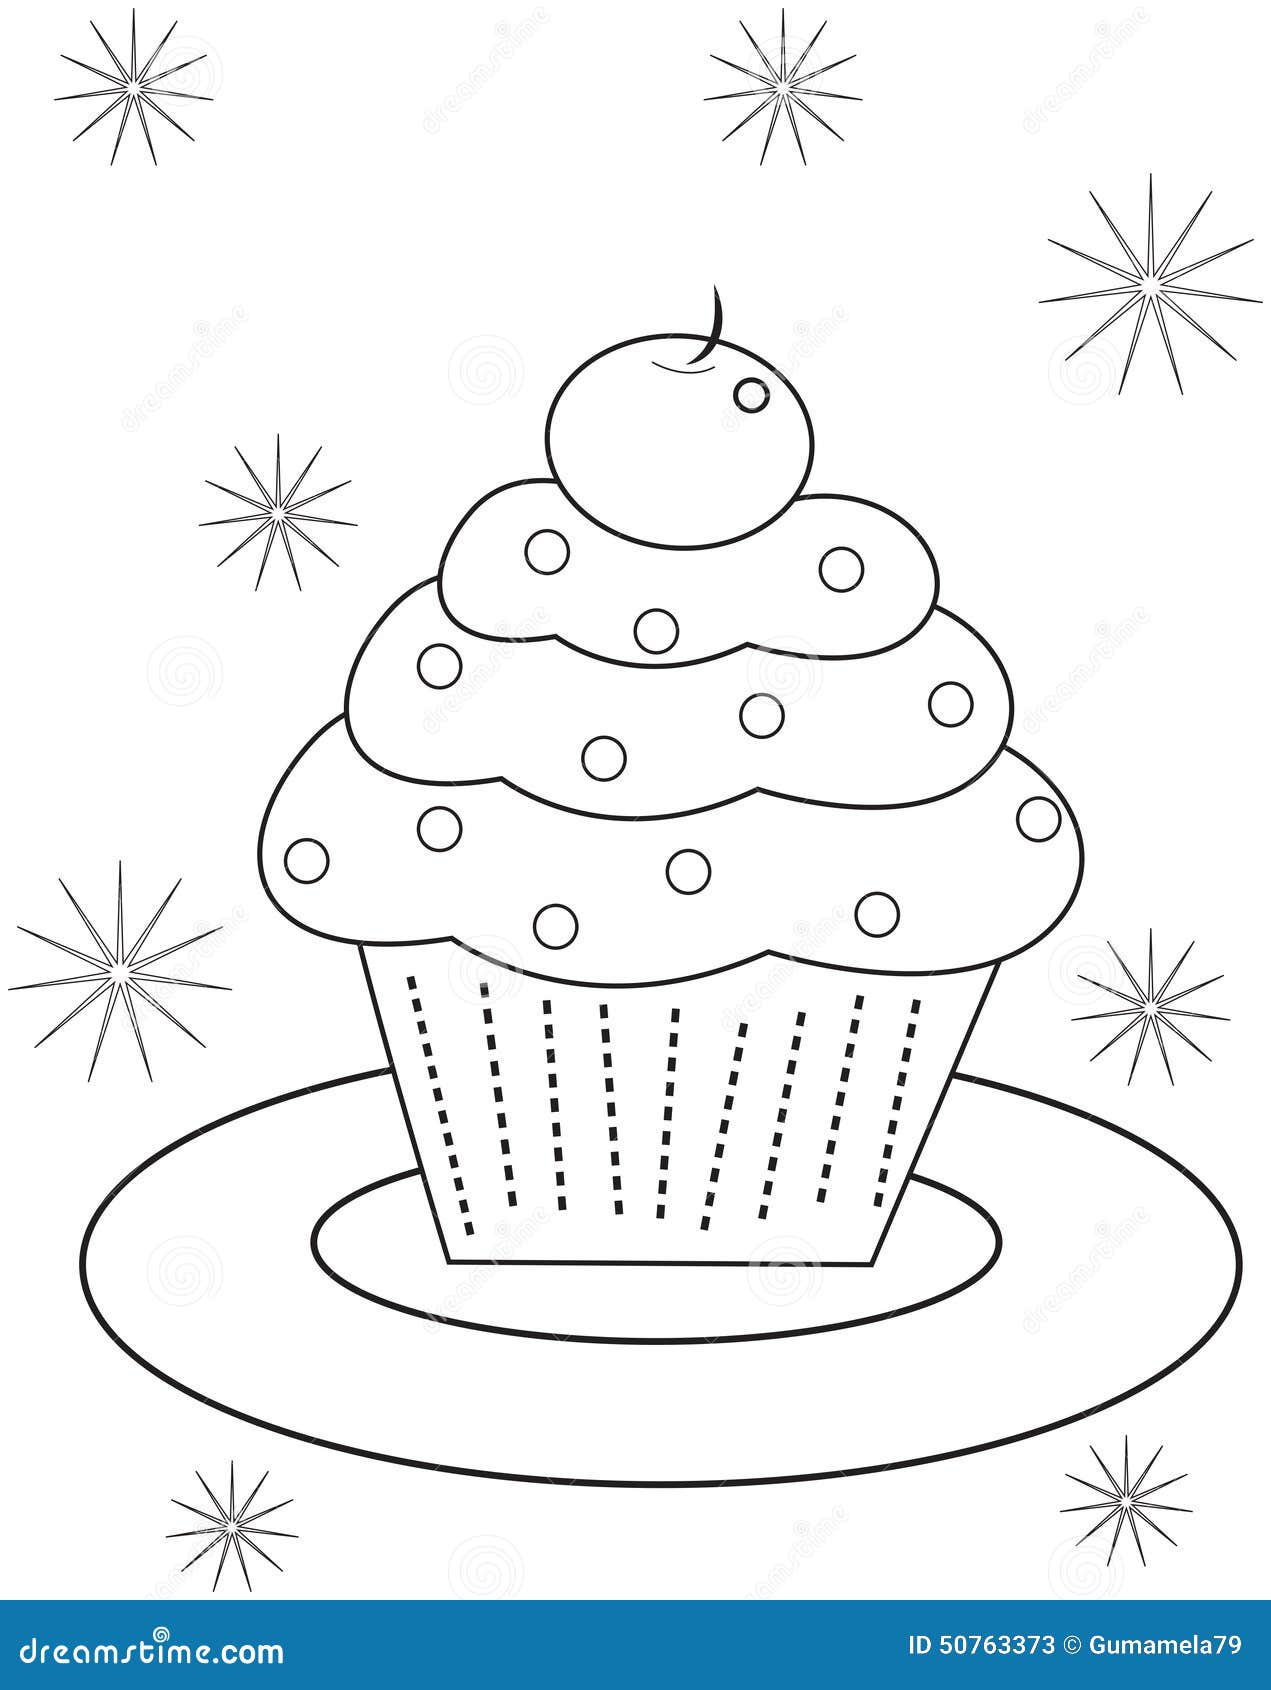 cake coloring pages with congratulations - photo #45